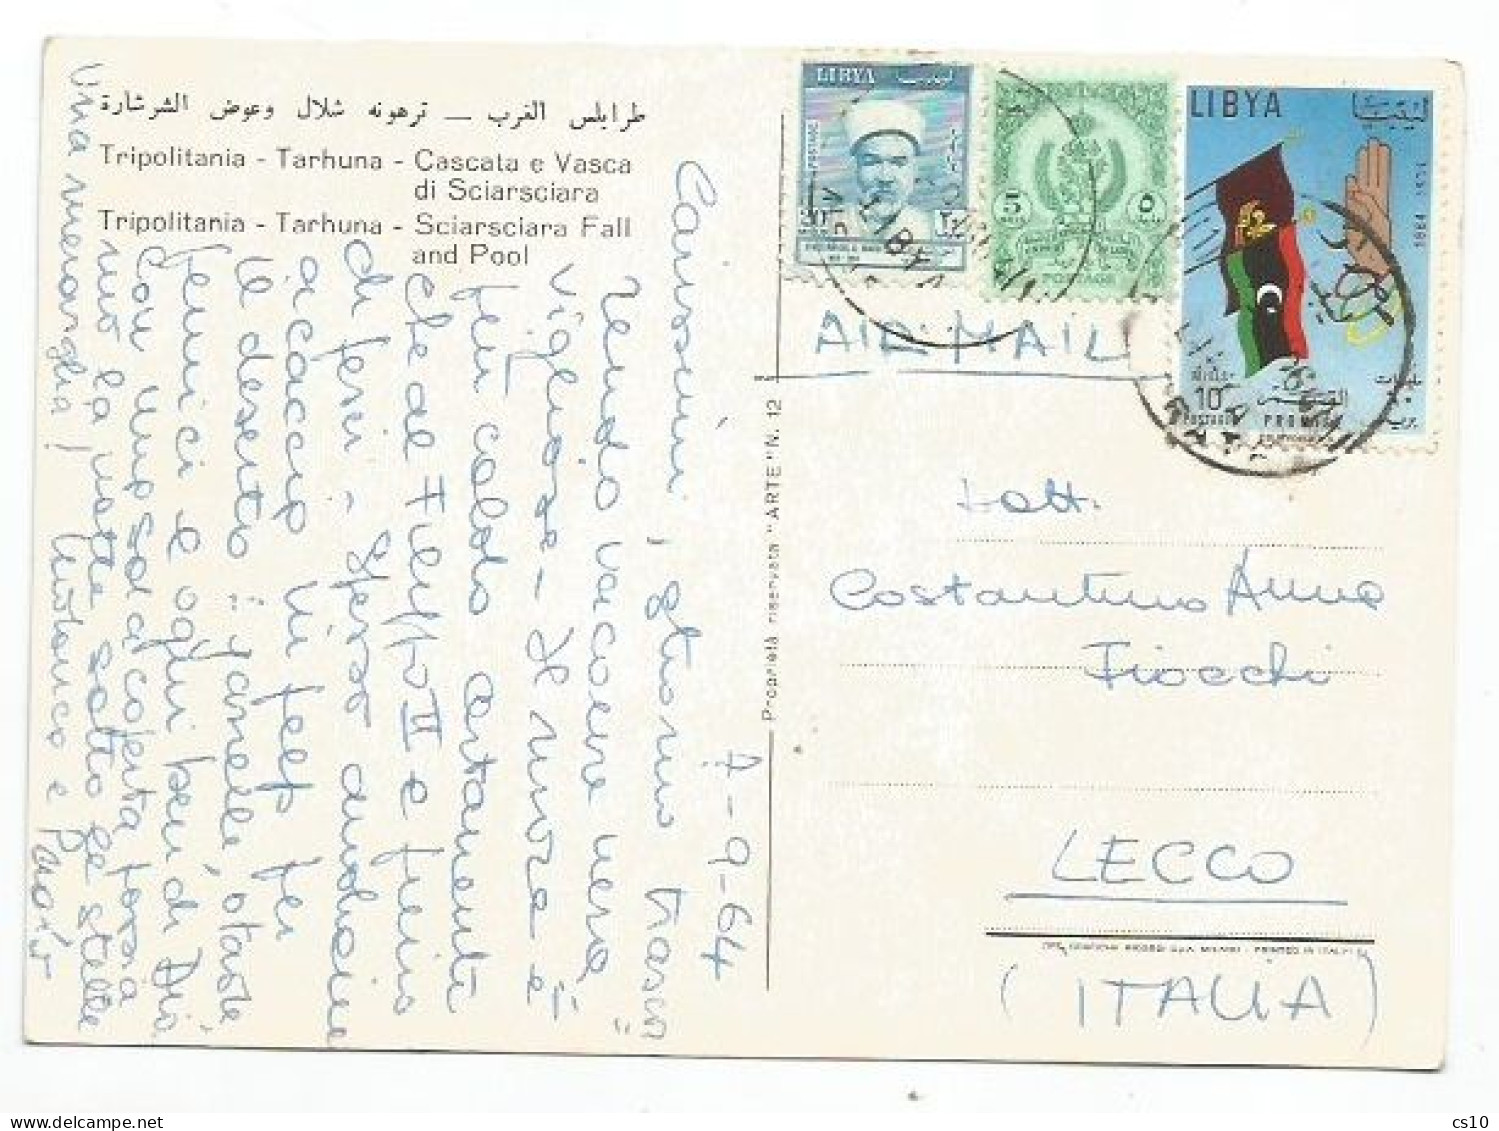 Libya 1962 Boy Scout Meeting 10m Value + Other Pcard Sciarsciara Fall & Pool 7sep1964 X Italy - Storia Postale